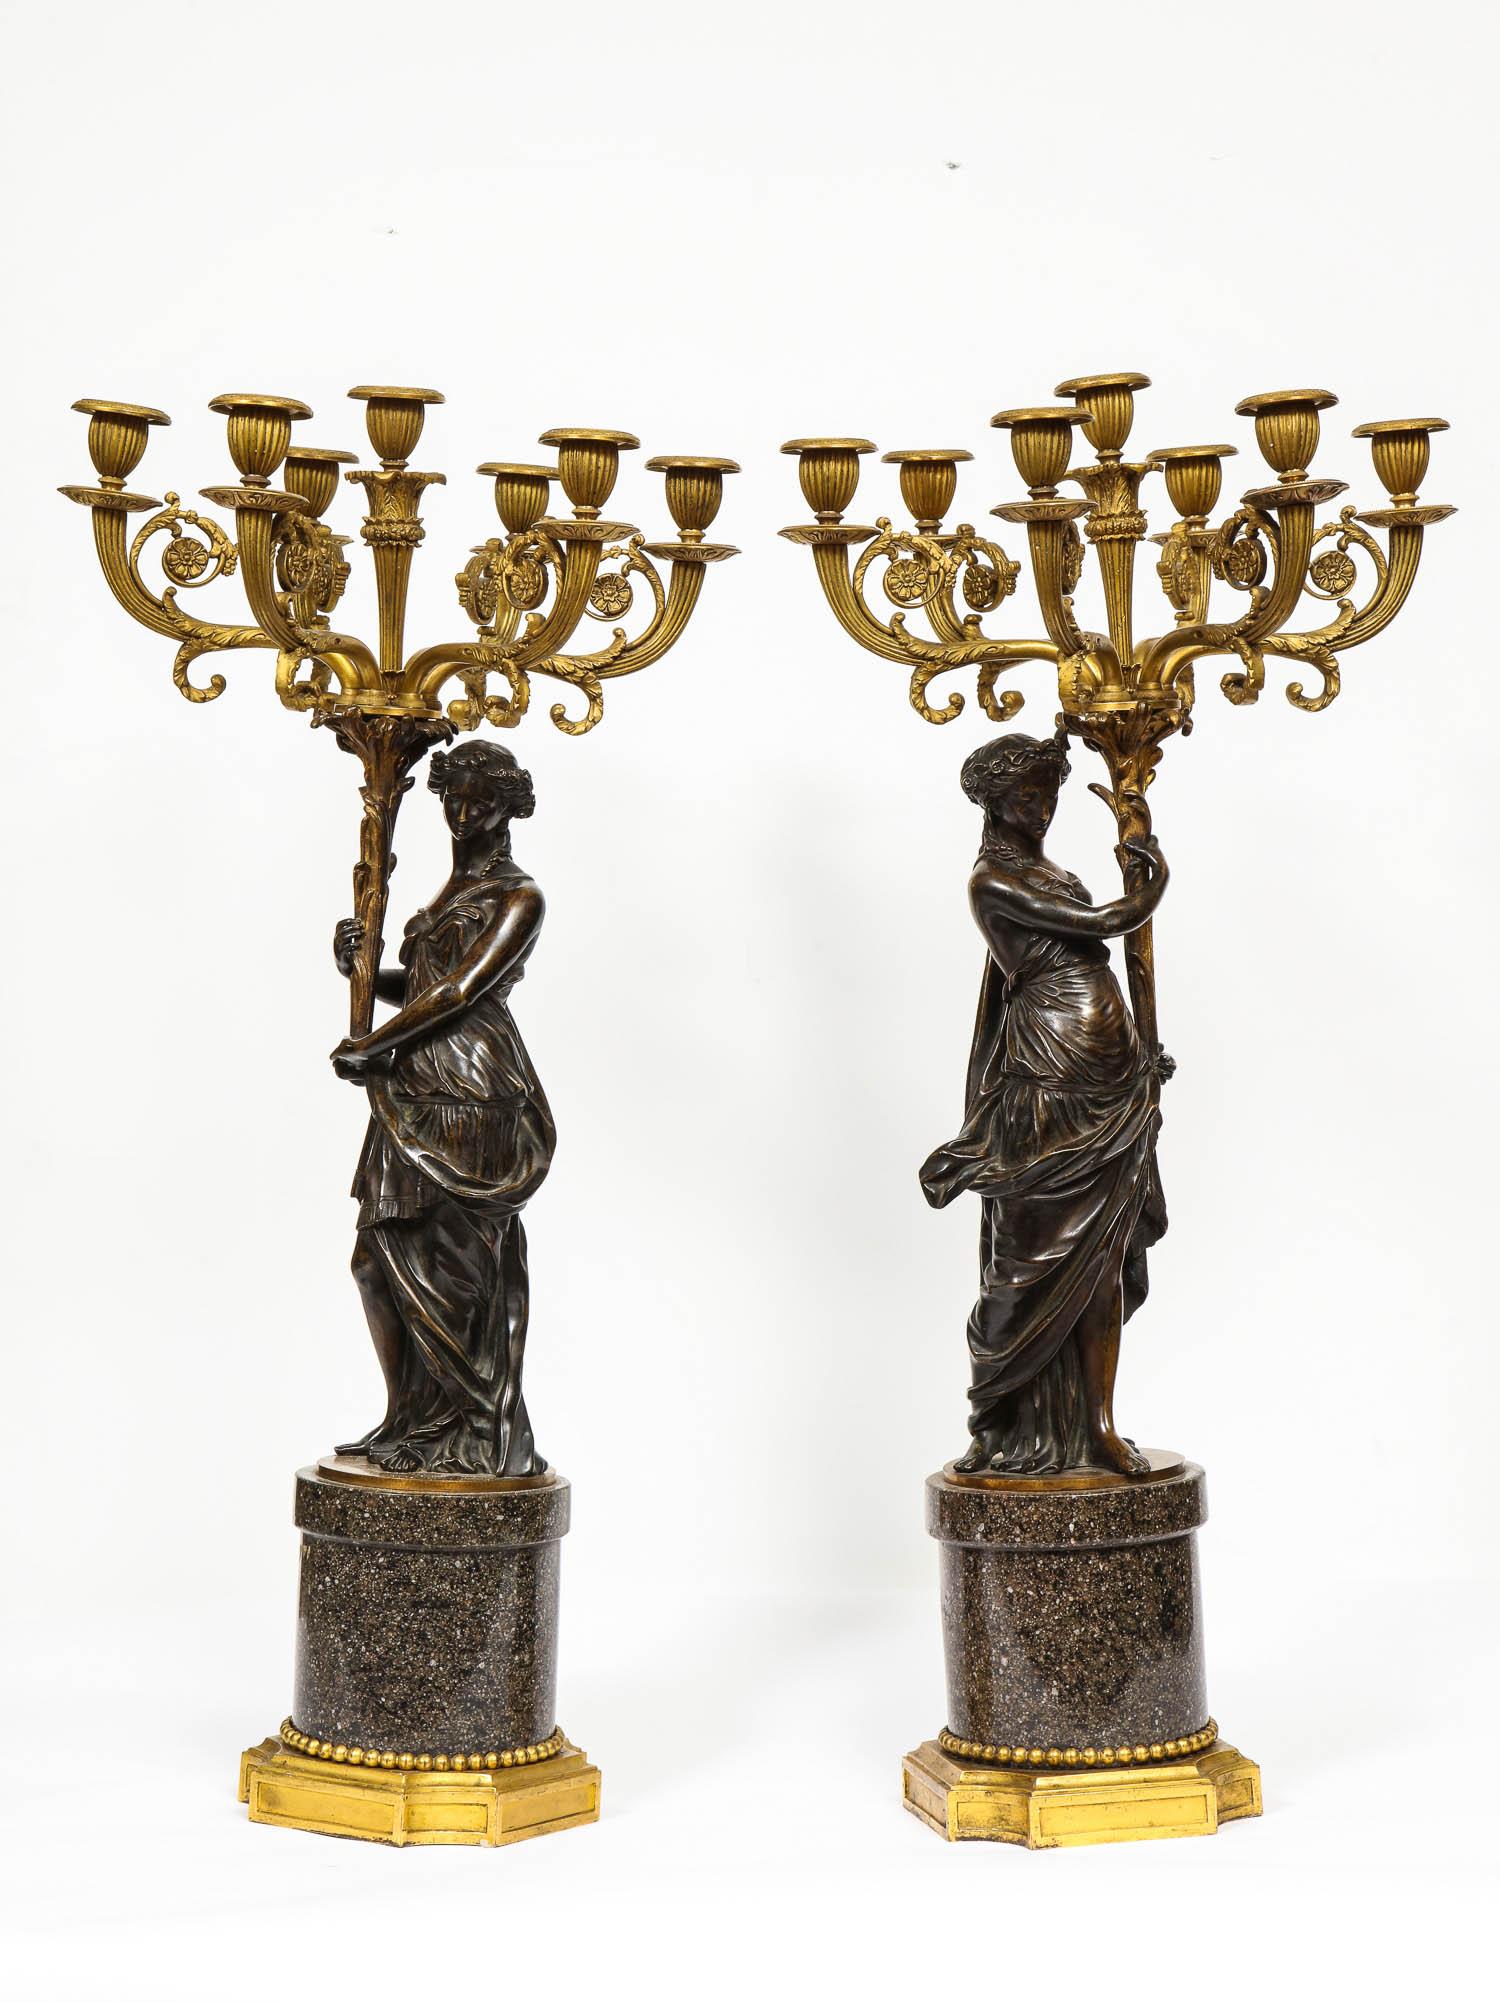 Large pair of French gilt and patinated bronze seven-light candelabras on Swedish Porphyry bases, depicting female maidens.

Very high quality. Could be turned into lamps.

Late 18th-early 19th century.

Measures: 29